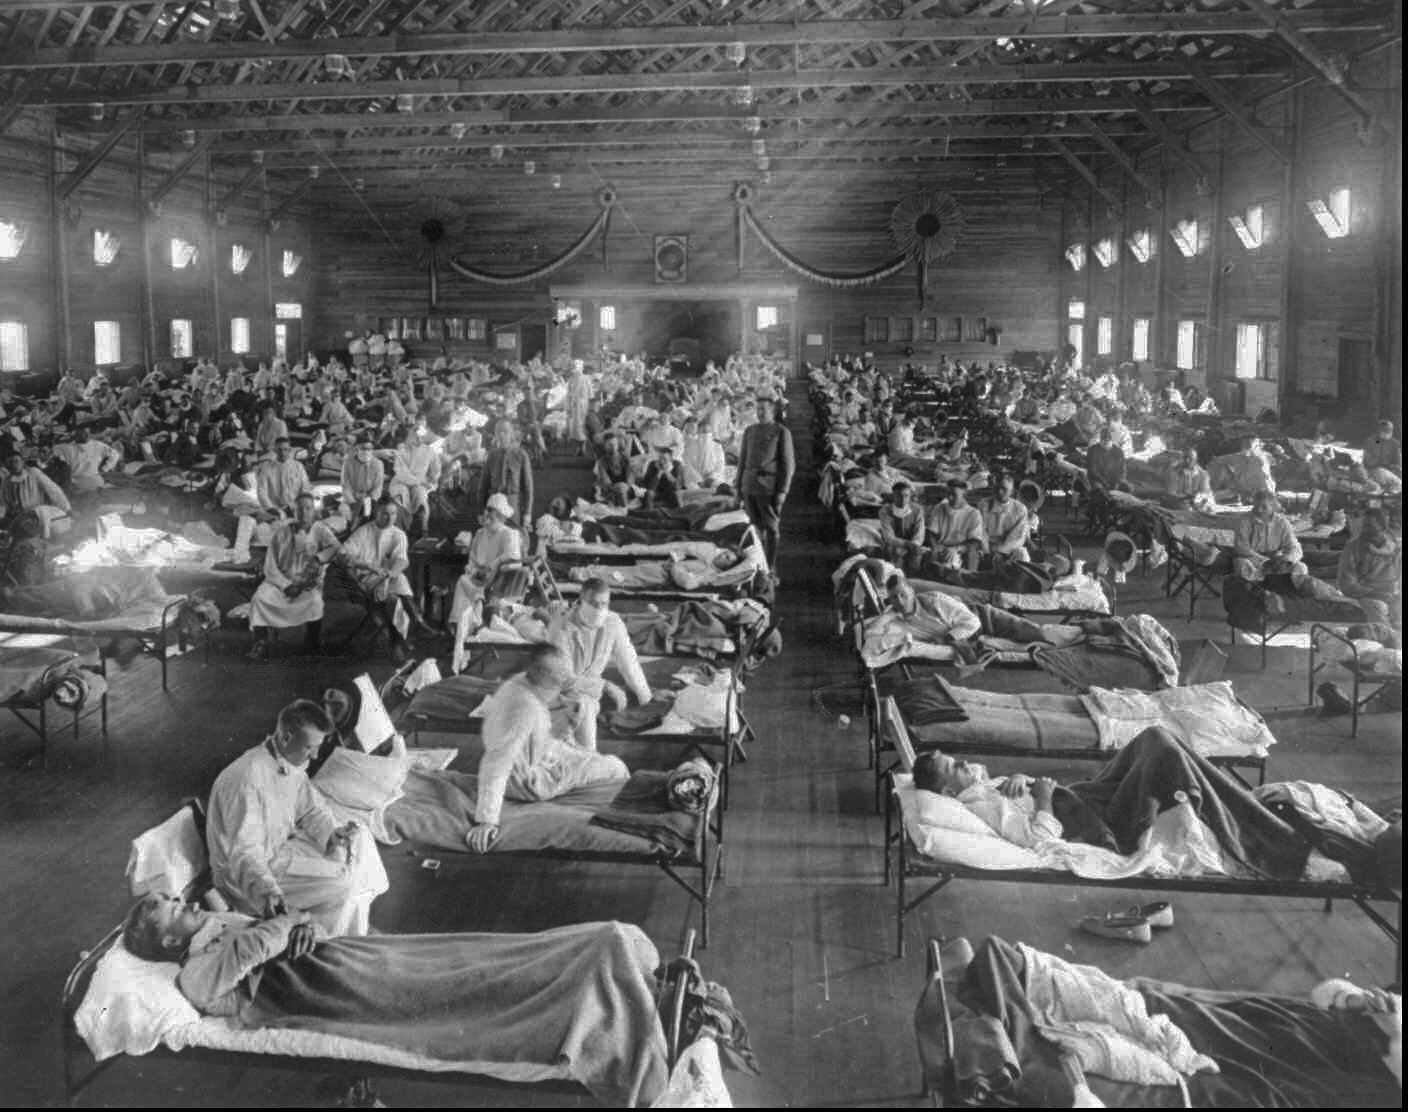 Spanish flu victims crowd into an emergency hospital in Kansas, USA in 1918 